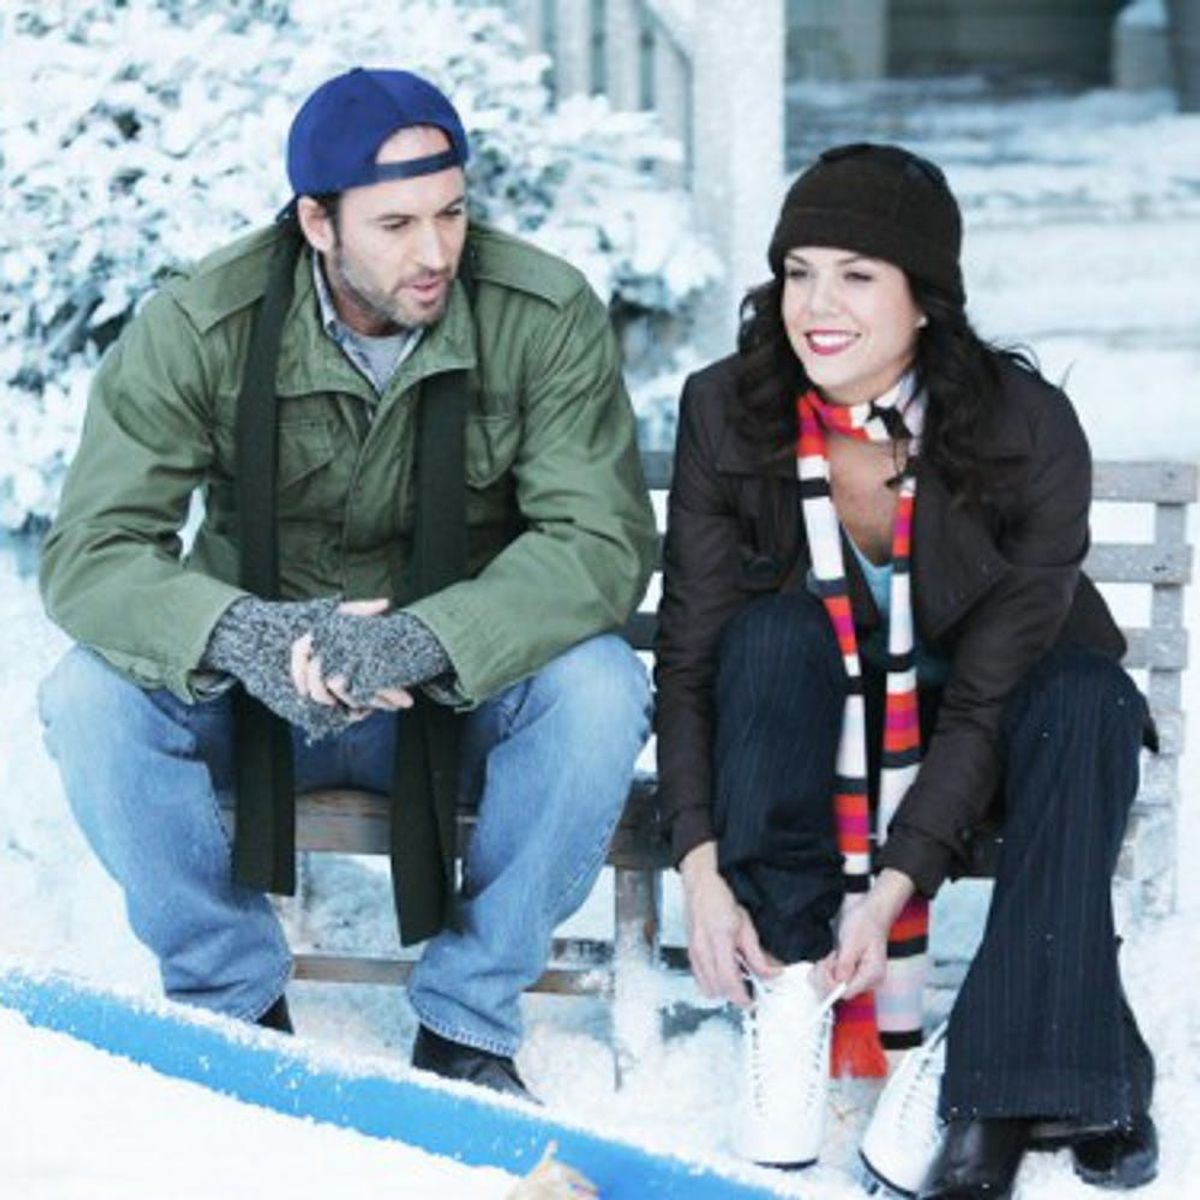 These Behind-the-Scenes Gilmore Girls Pics Are Giving Us Some Super Exciting Hints